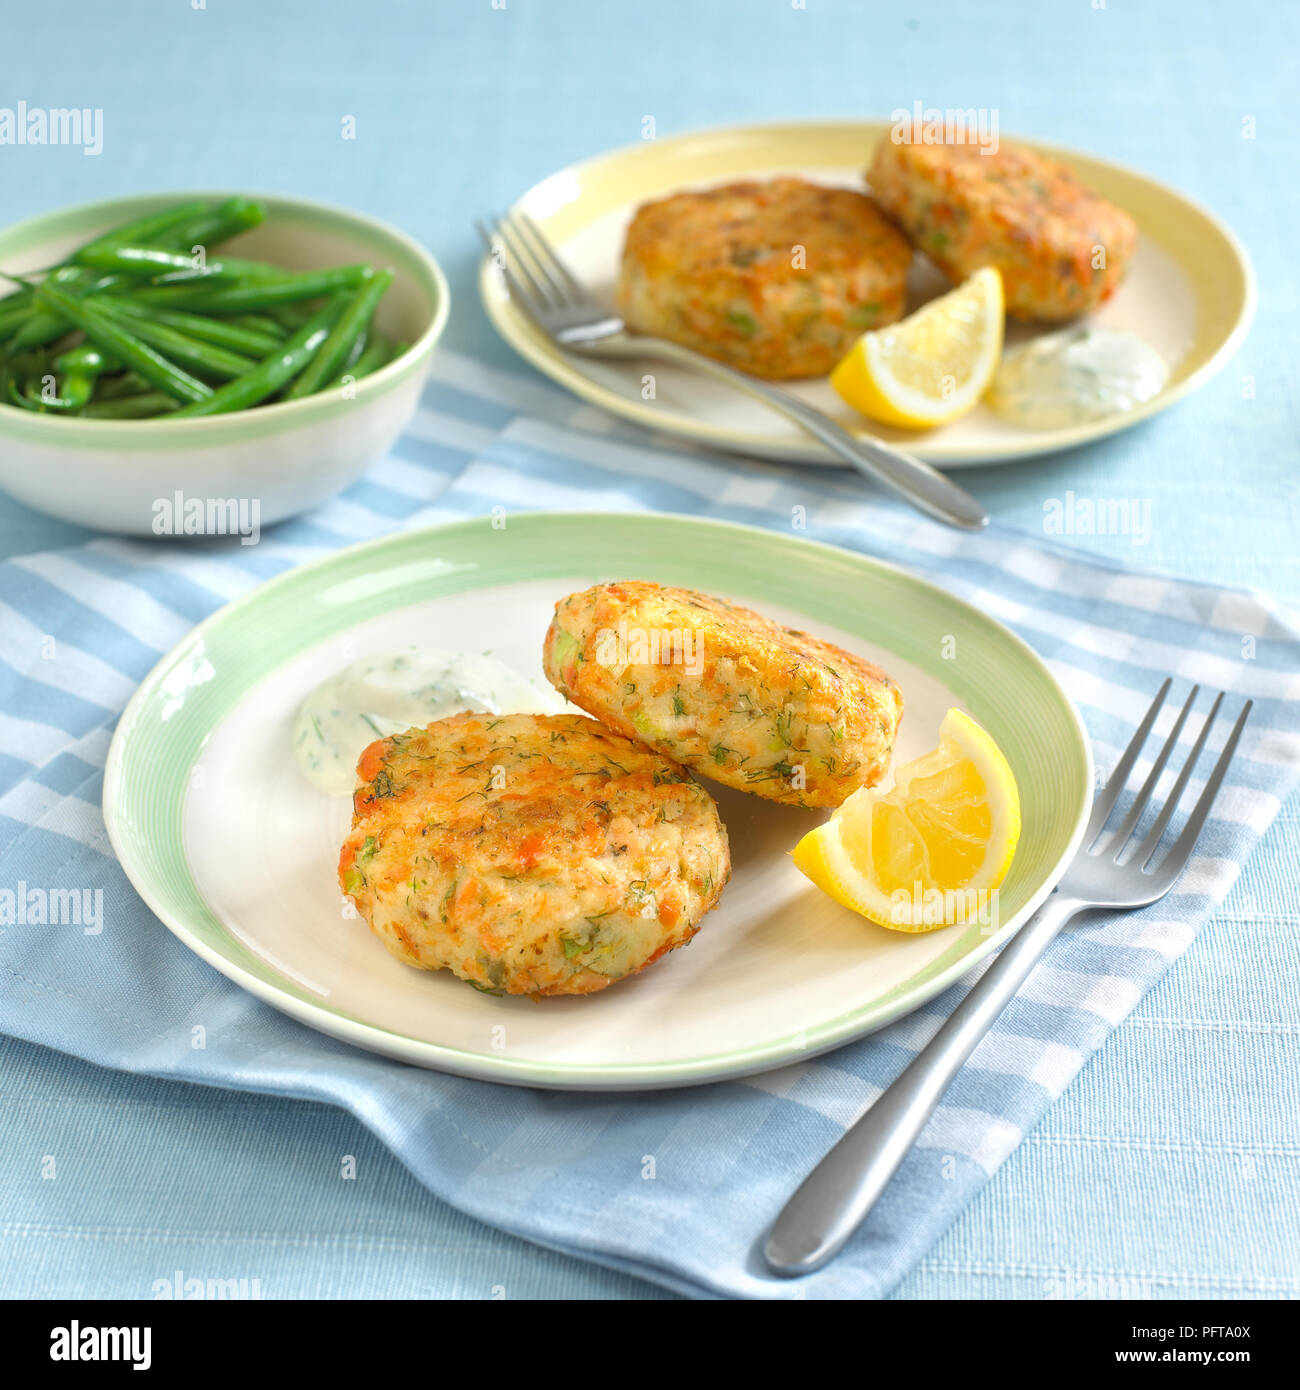 Fishcakes on plate Banque D'Images